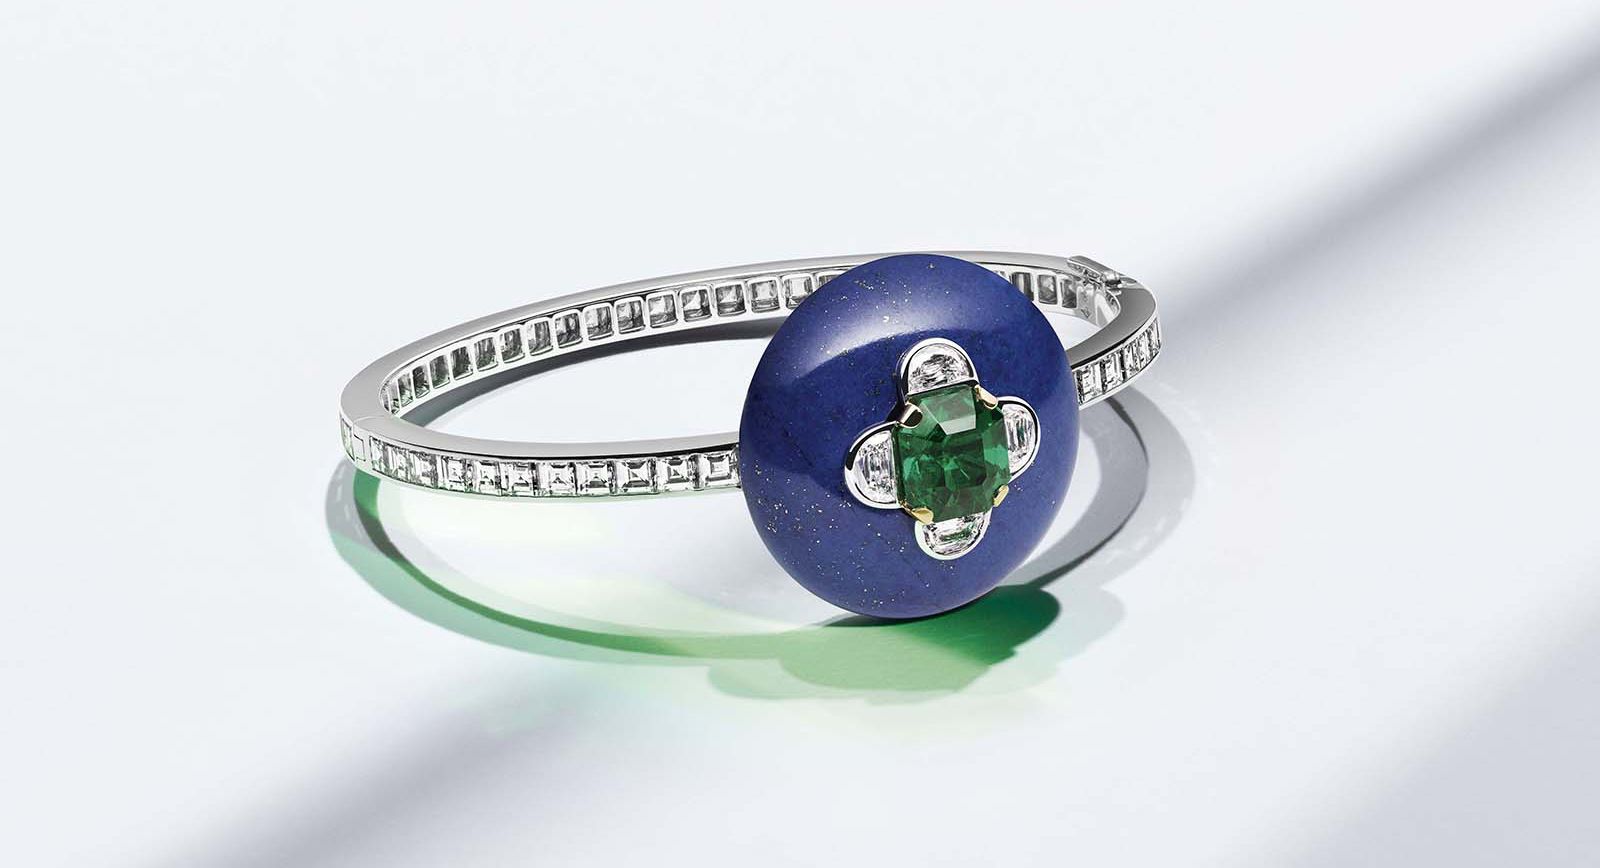 A ring from Francesca Amfitheatrof's debut 'Riders of the Knights’ collection for Louis Vuitton